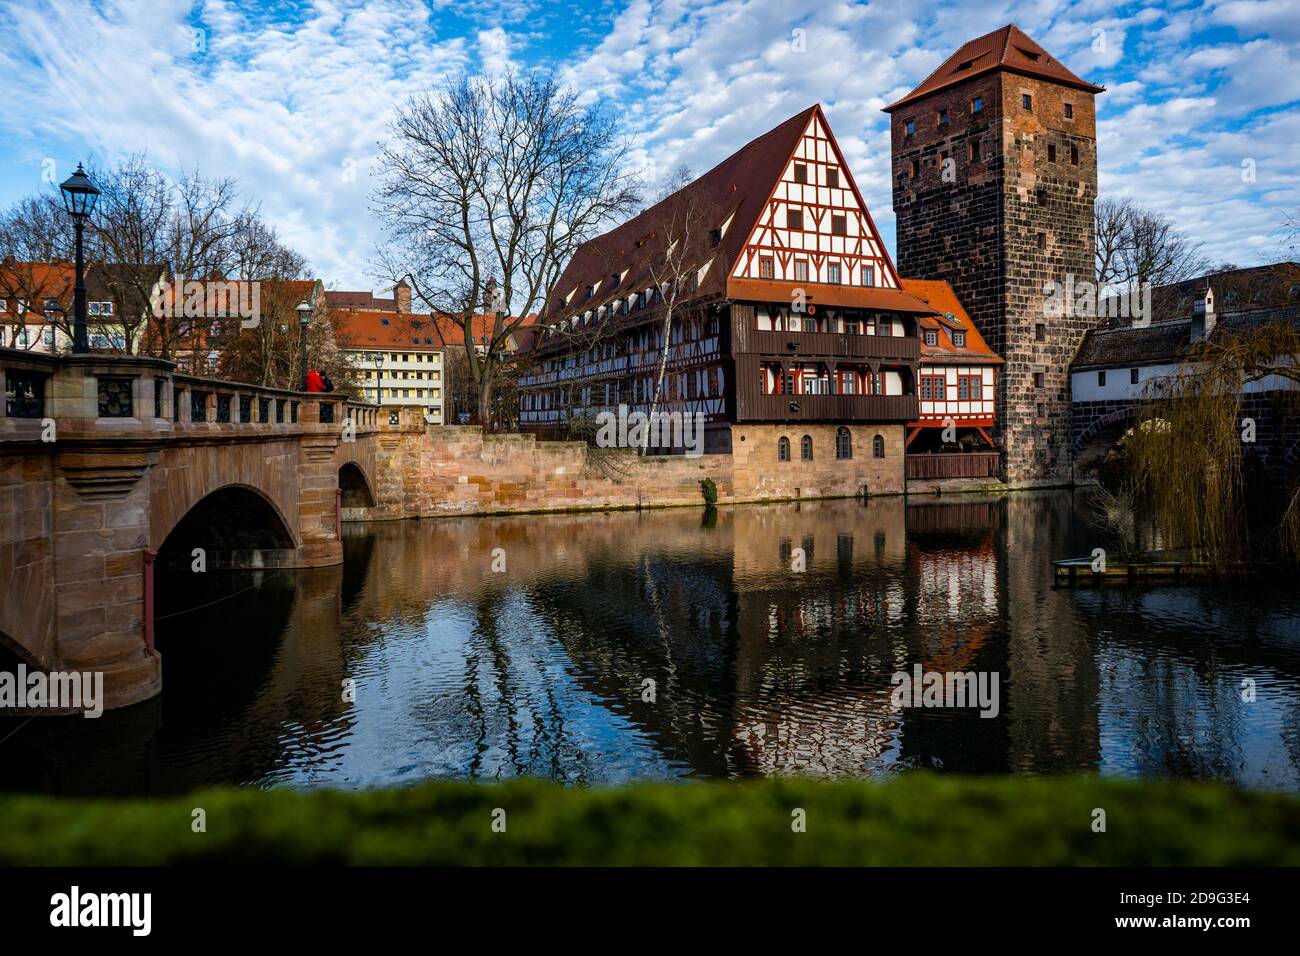 old town of nuremberg germany Stock Photo